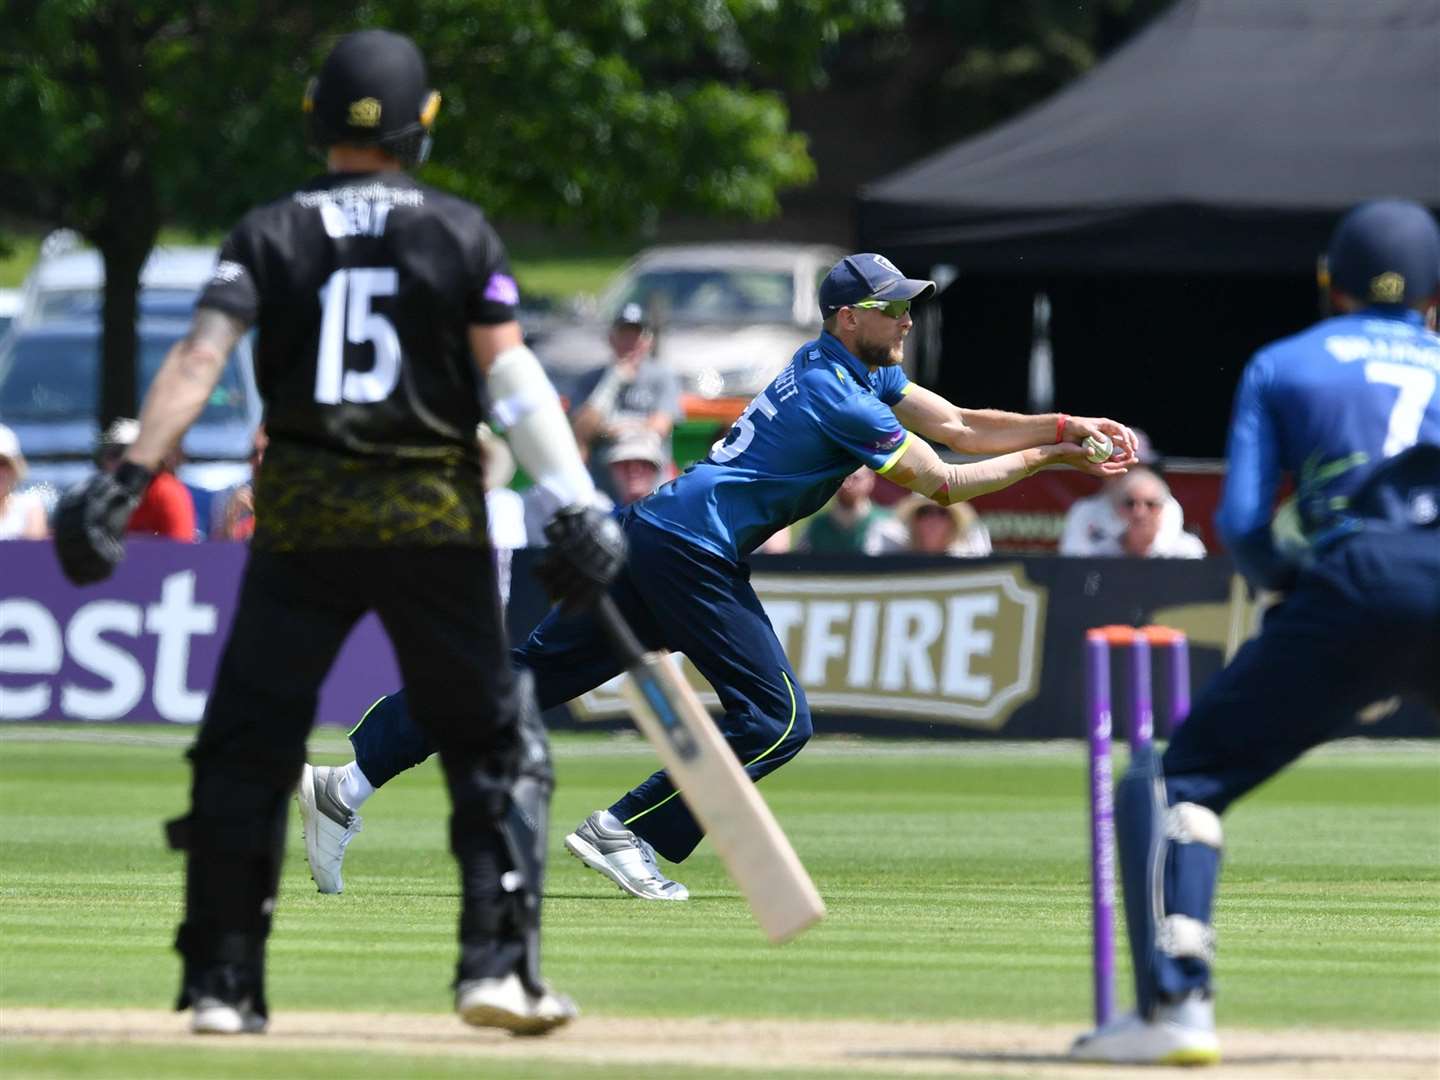 Kent's Calum Haggett catches Gloucestershire's Chris Dent on Sunday. Picture: Keith Gillard